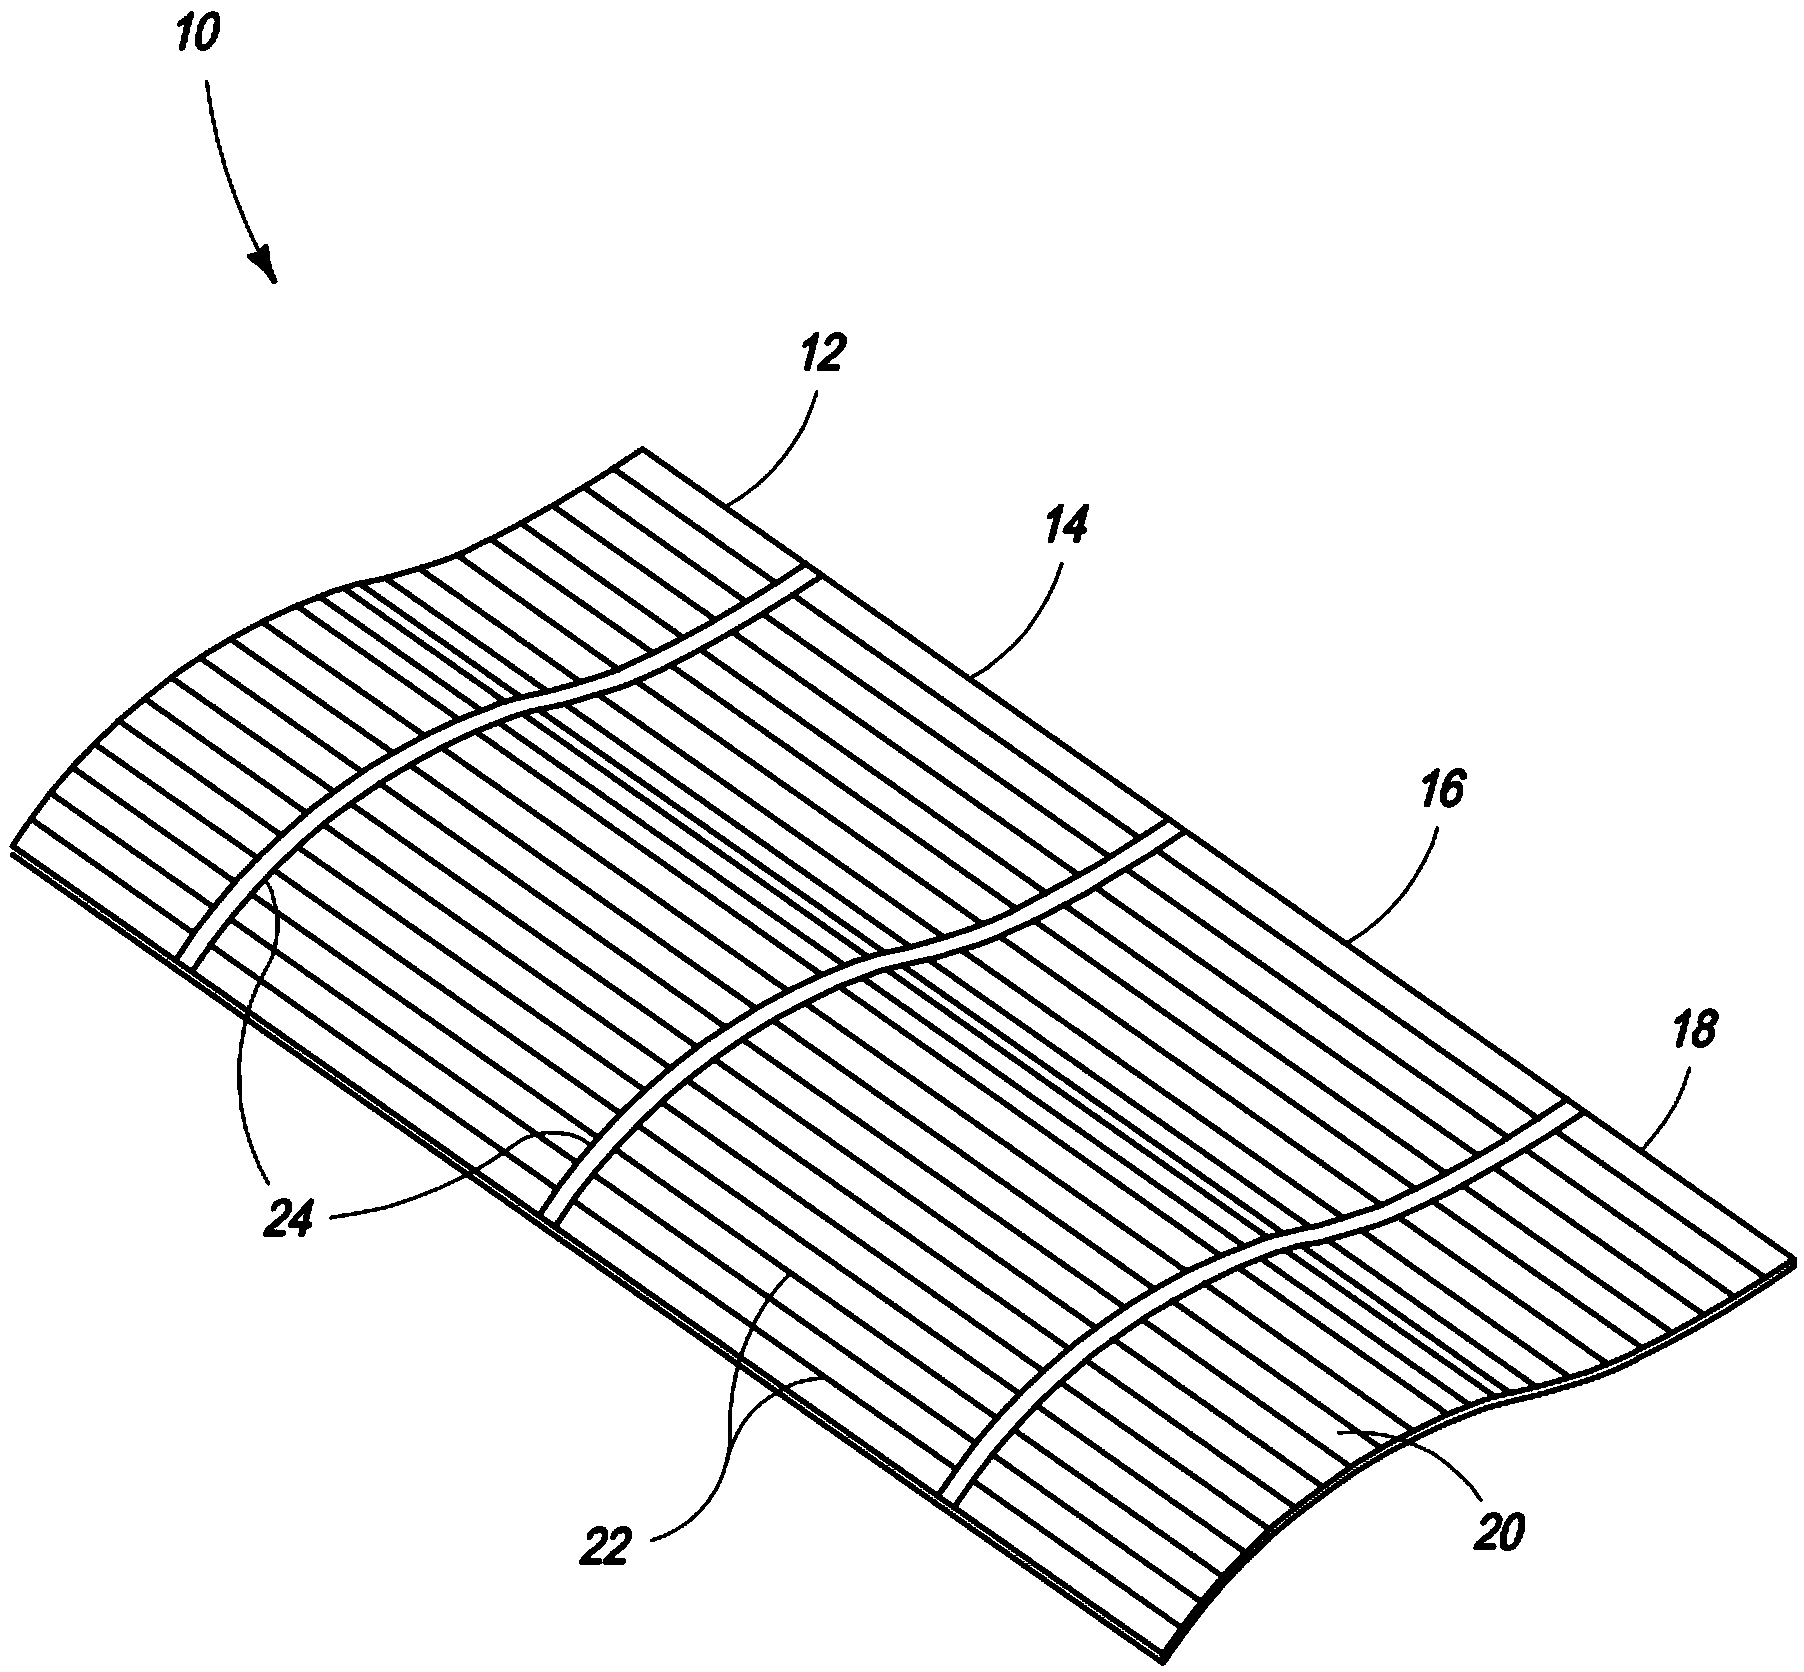 Integrated thin film solar cell interconnection